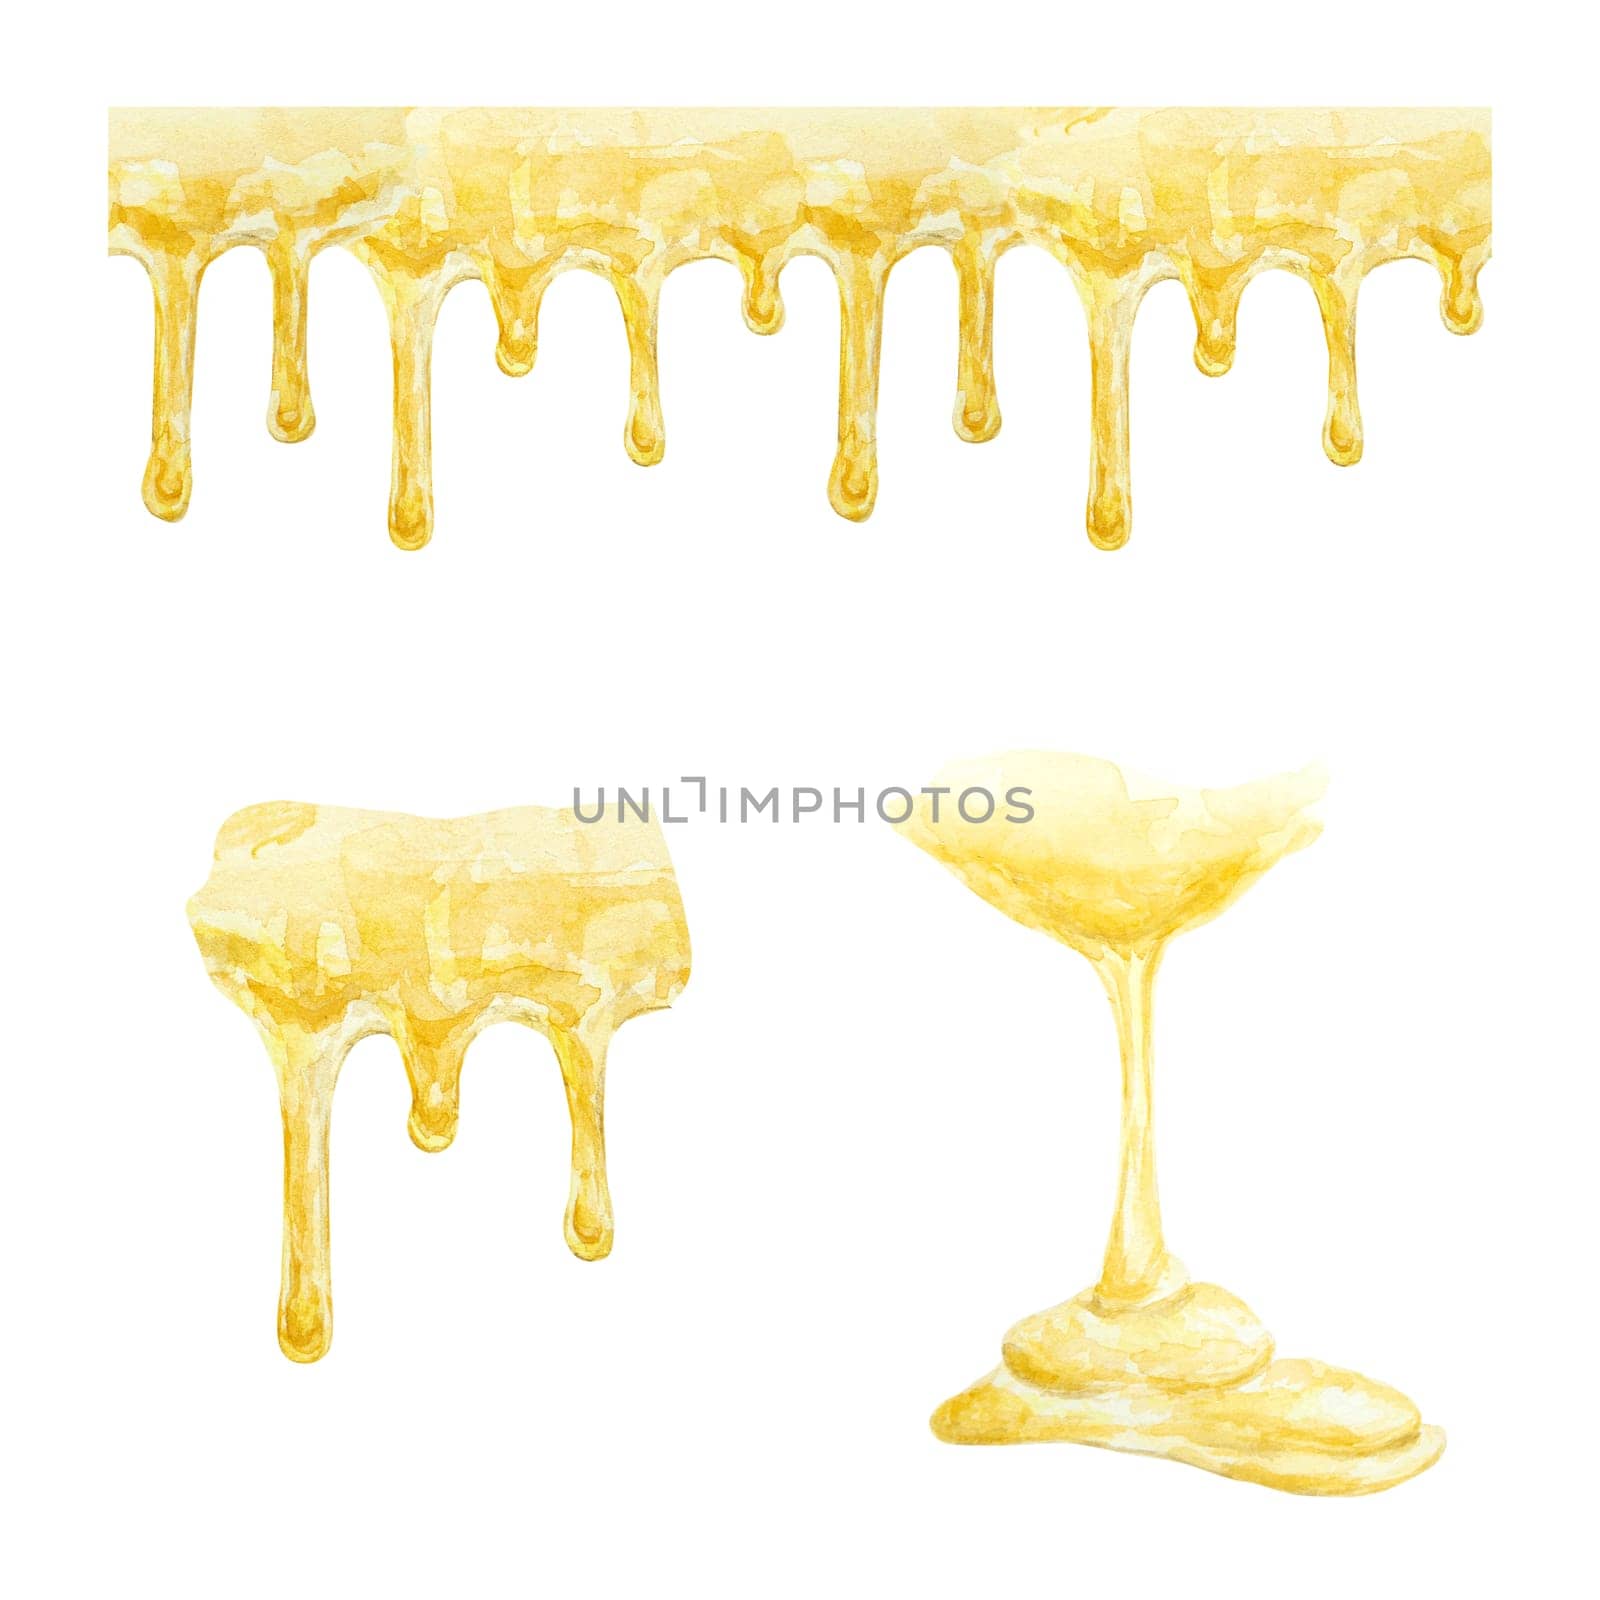 Watercolor illustration of bee and honey. Hand drawn and isolated on white background. Great for printing on fabric, postcards, invitations, menus, cosmetics, cooking books and more.